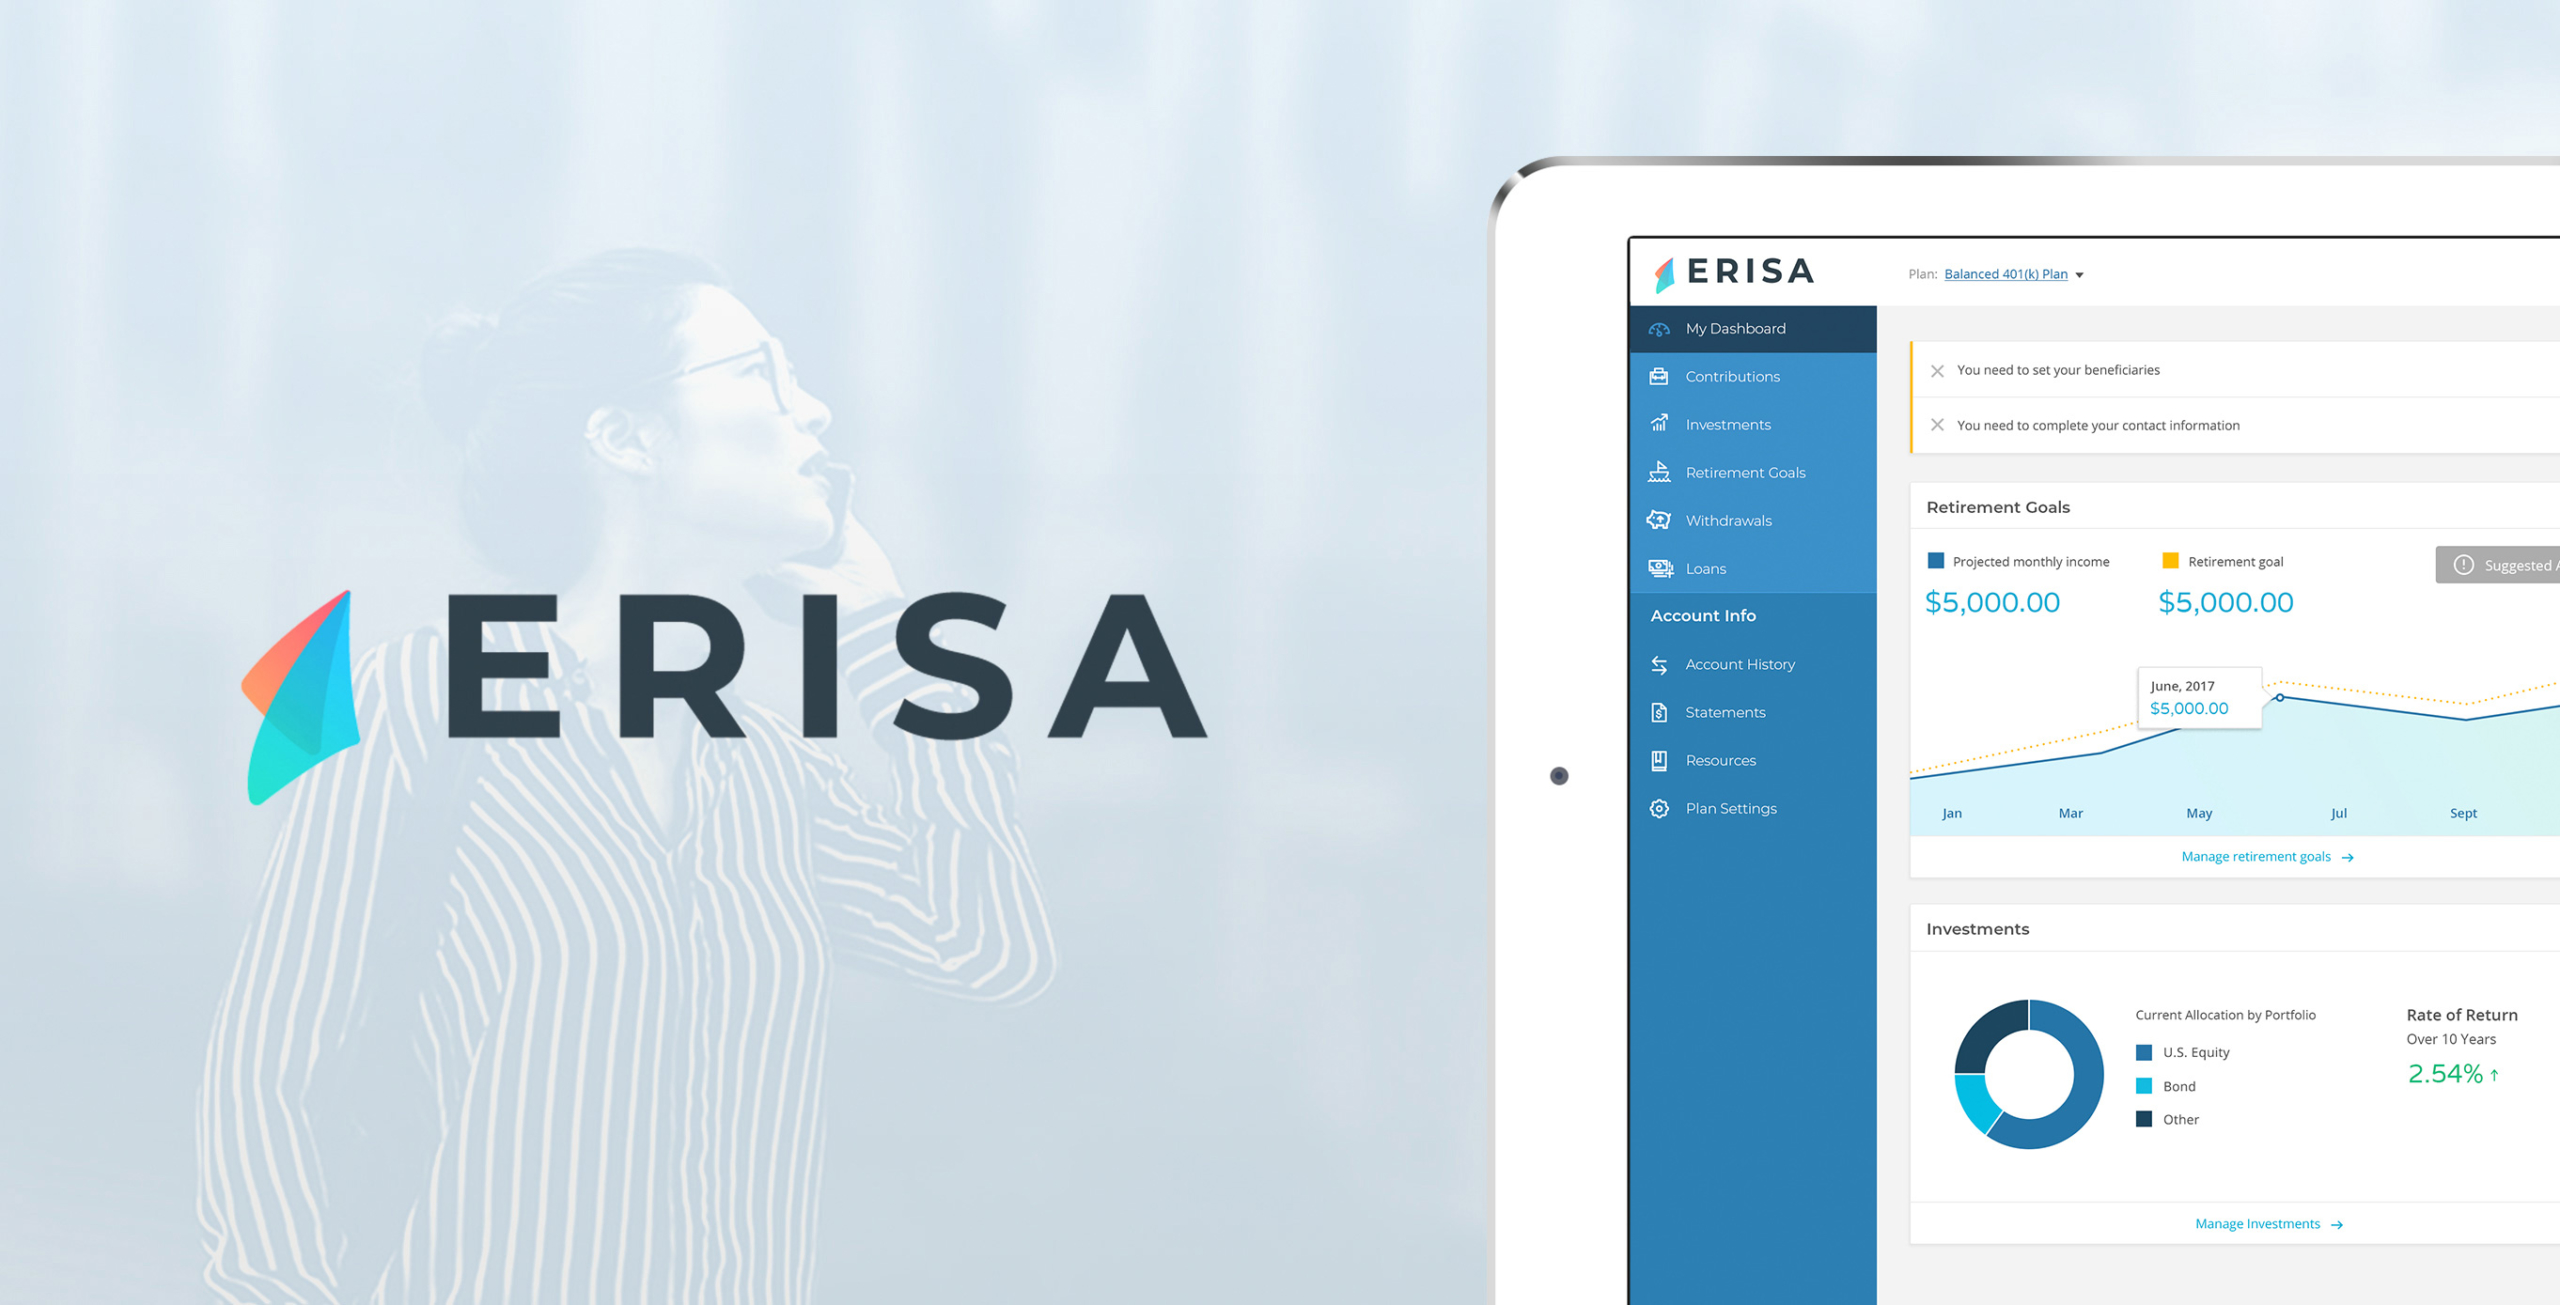 Web & Application Design for Financial Business ERISA, by DesignUps